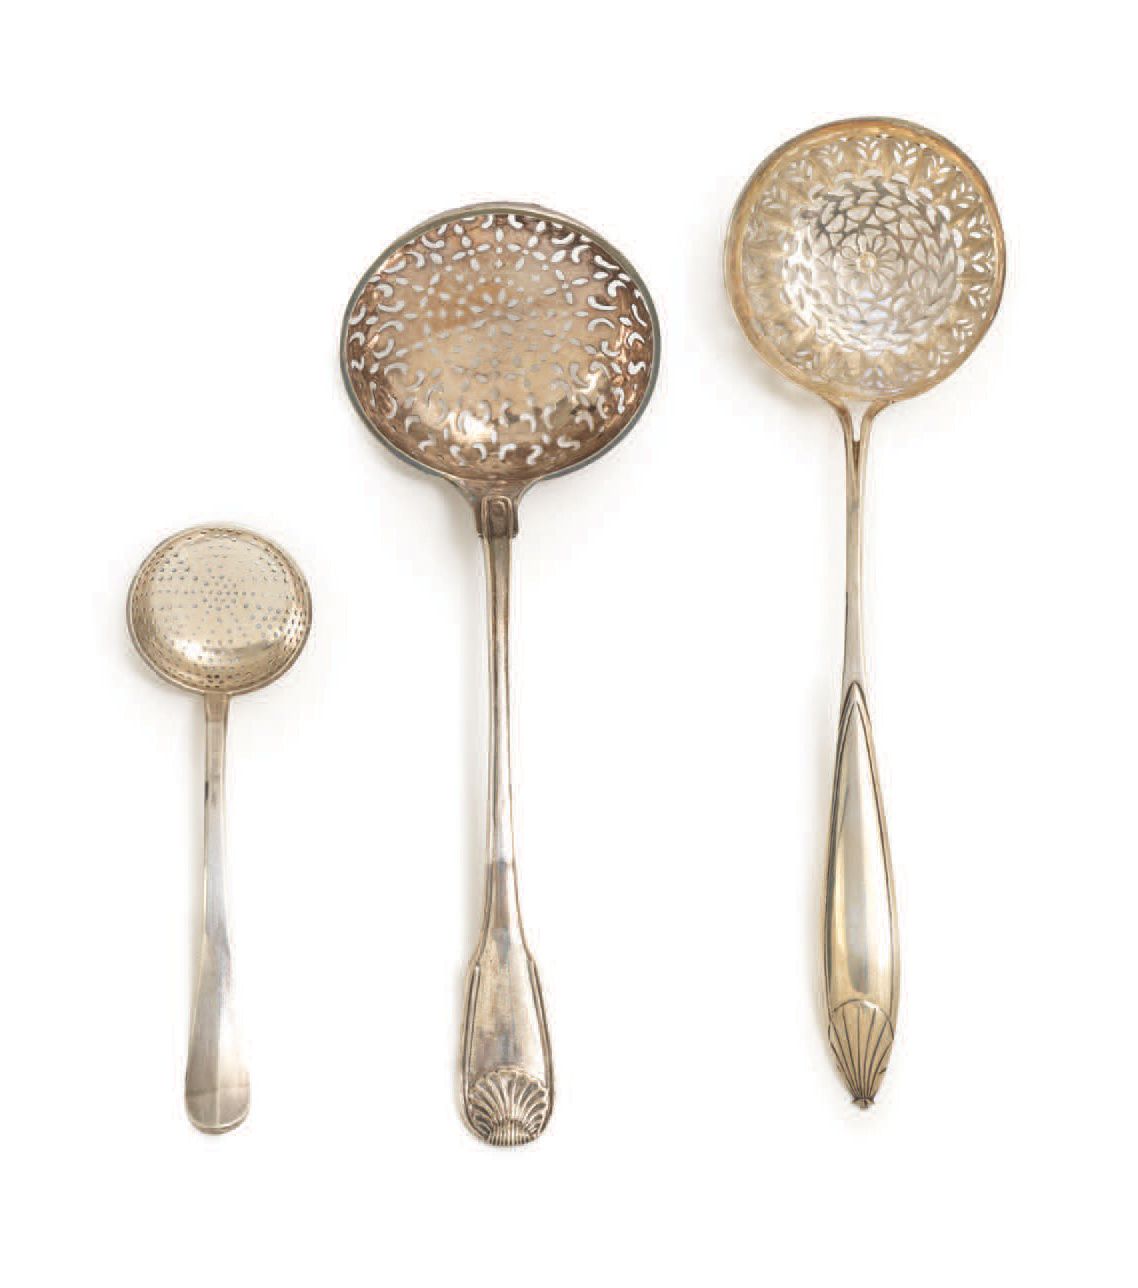 Null LOT OF THREE SILVER SPOONS Antwerp & Brussels, 1783, 1785
H_12 to 20 cm - W&hellip;